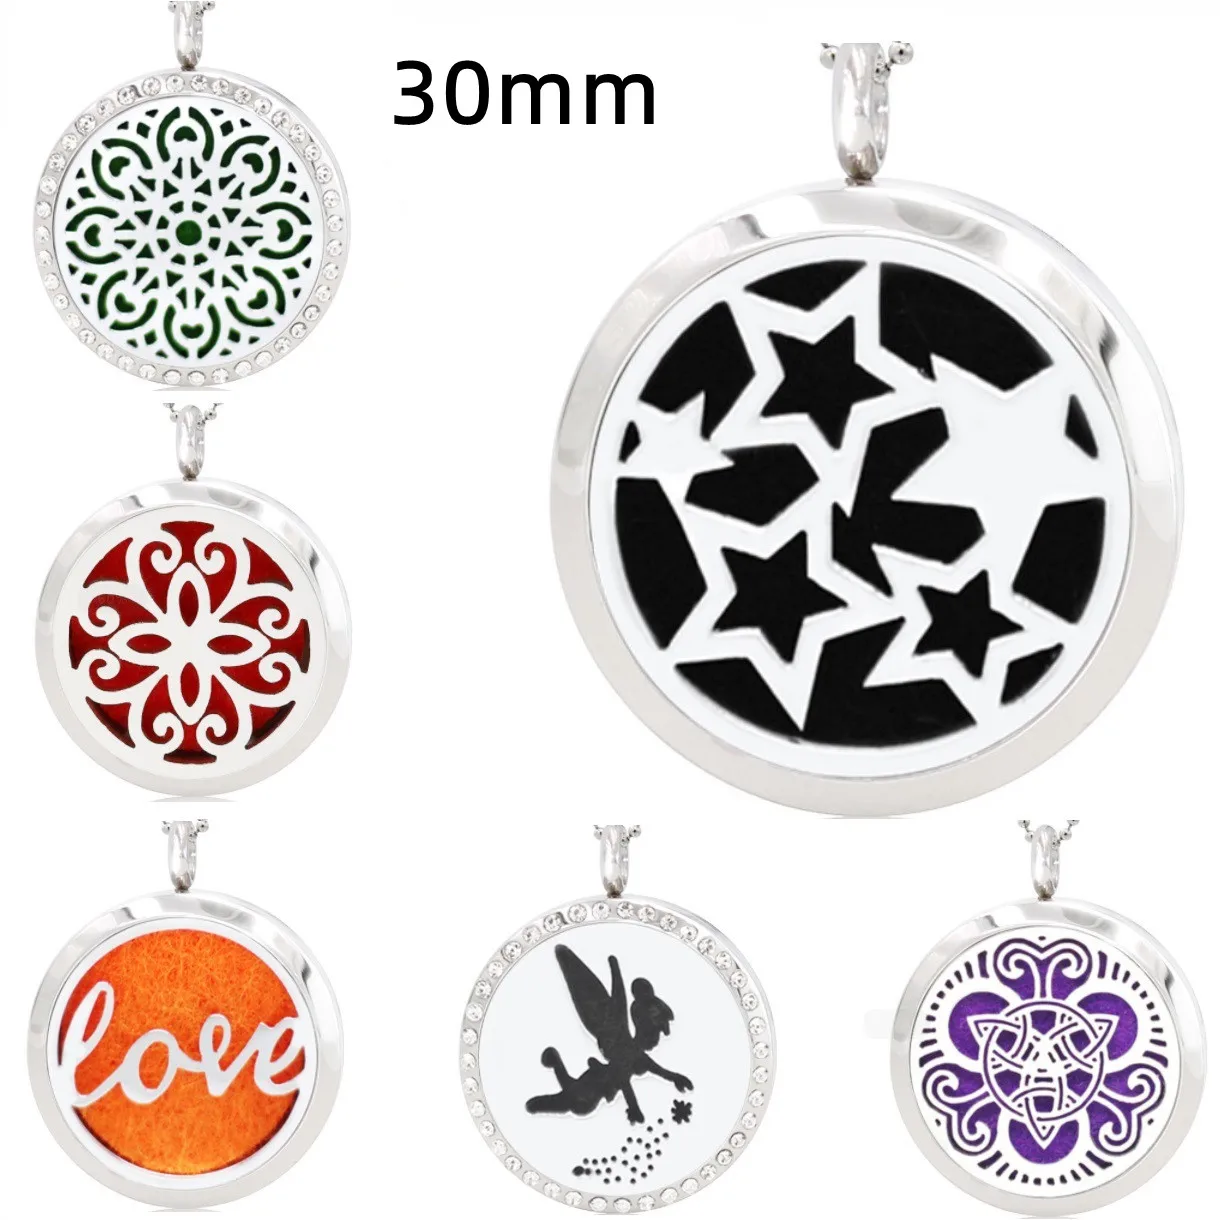 

1PC Love Angel 30mm Diffuser Locket Pendant 316L Stainless Steel Essential Oil Aromatherapy Perfume Lockets Jewelry Free 10Pads